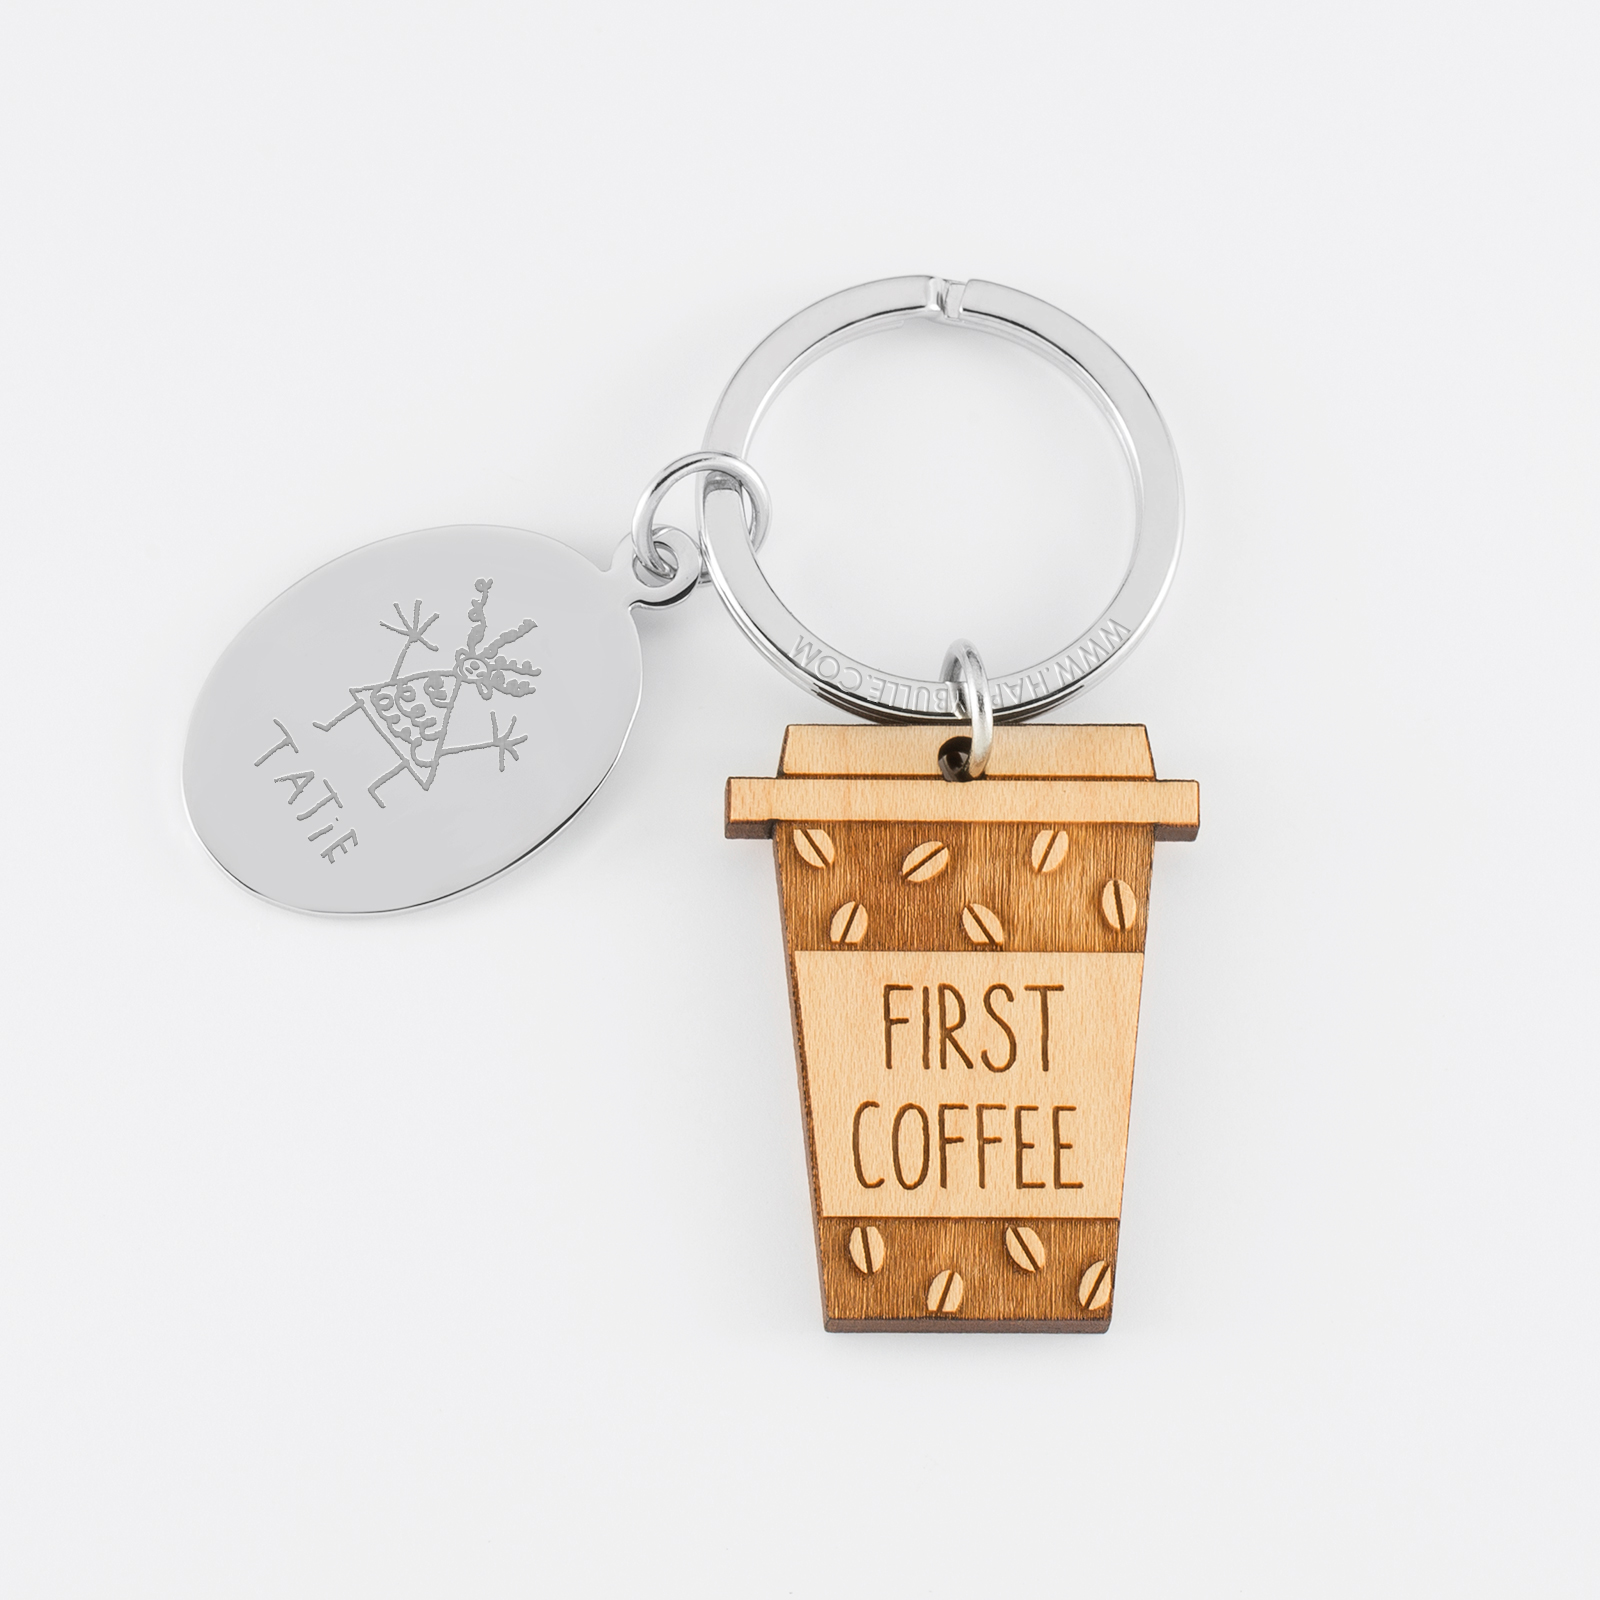 Personalised engraved oval steel medallion and wooden coffee charm keyring - sketch